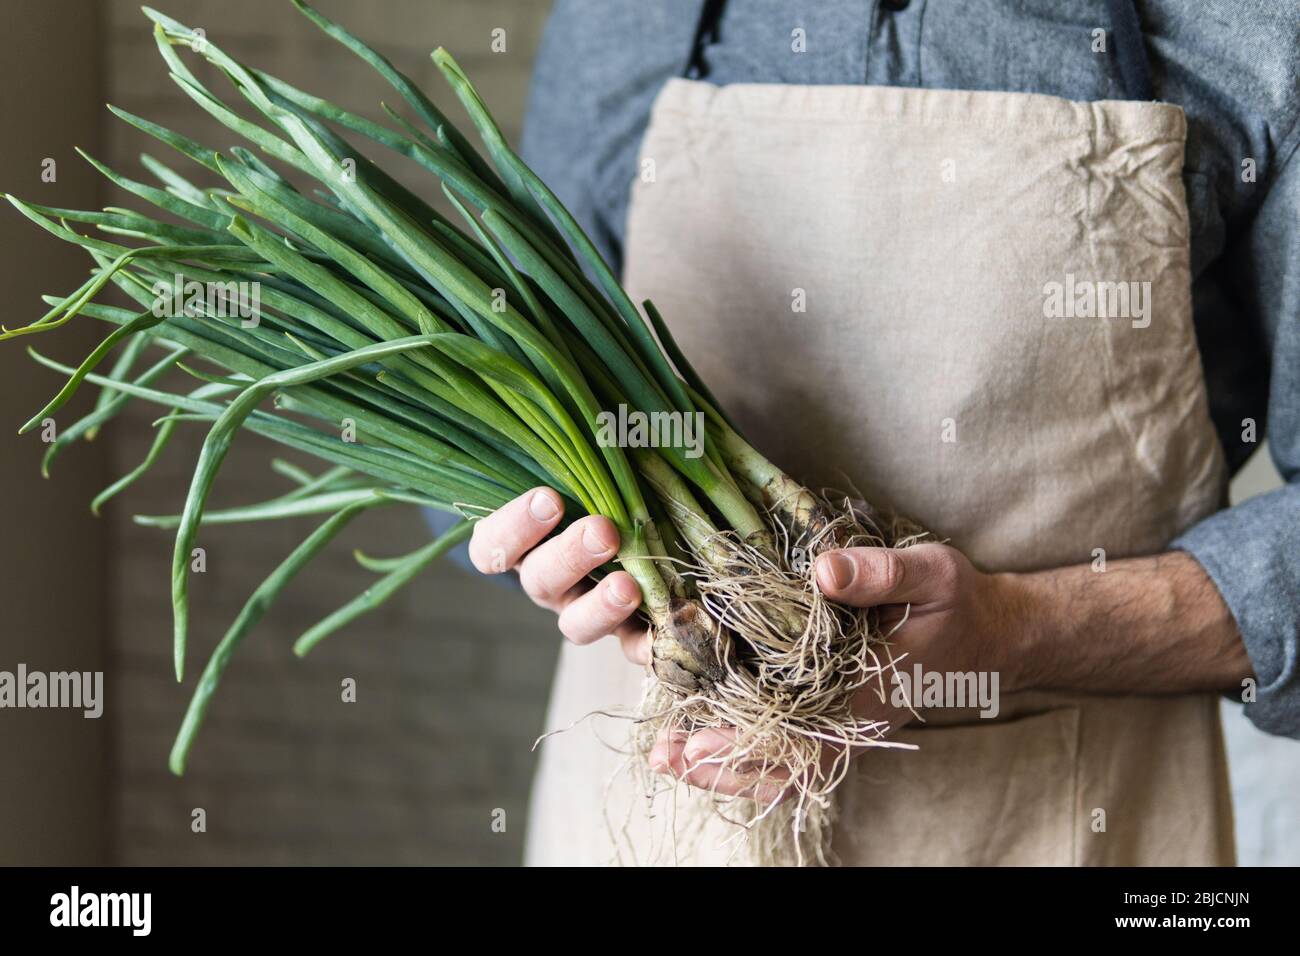 Young man in rustic apron holding a bunch of green onions. Healthy, vegetarian and organic farm food concept. Stock Photo